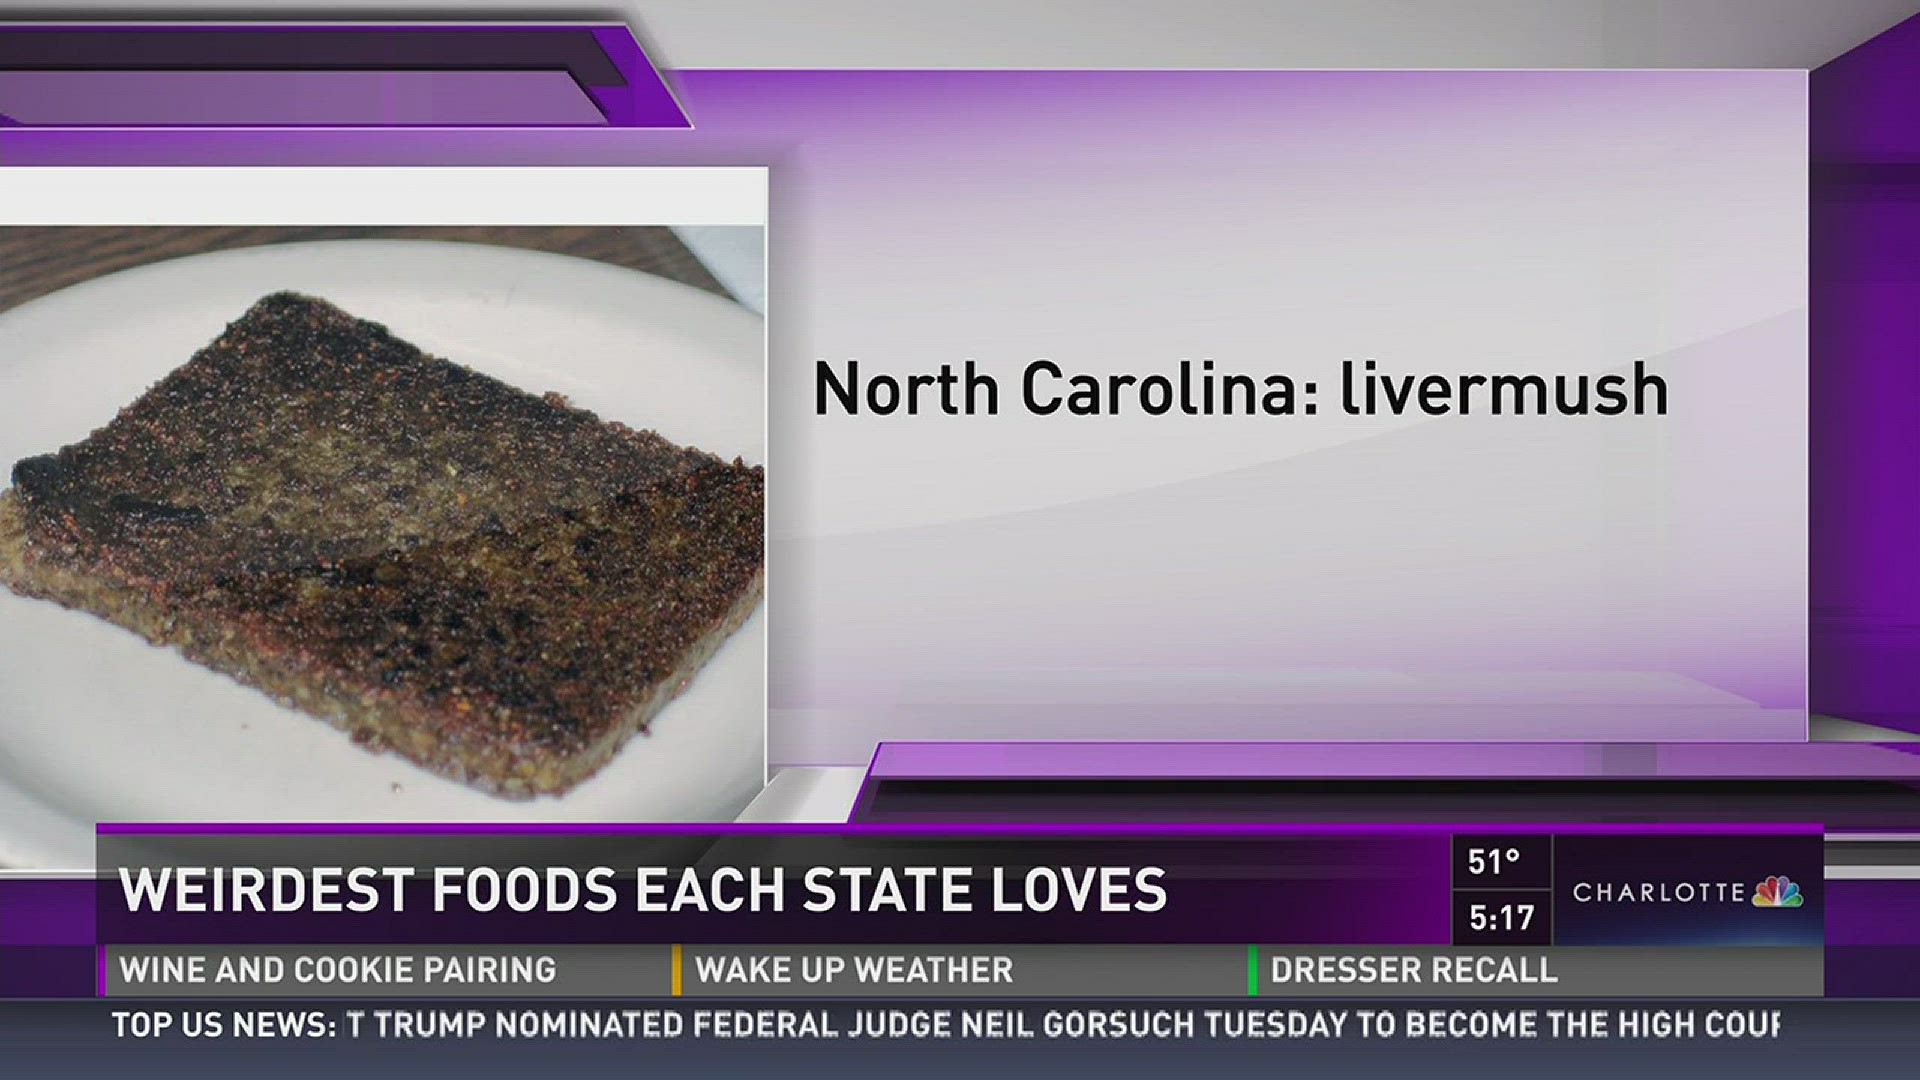 The Carolinas have some culinary quirks to go along with staples barbecue and pimento cheese.